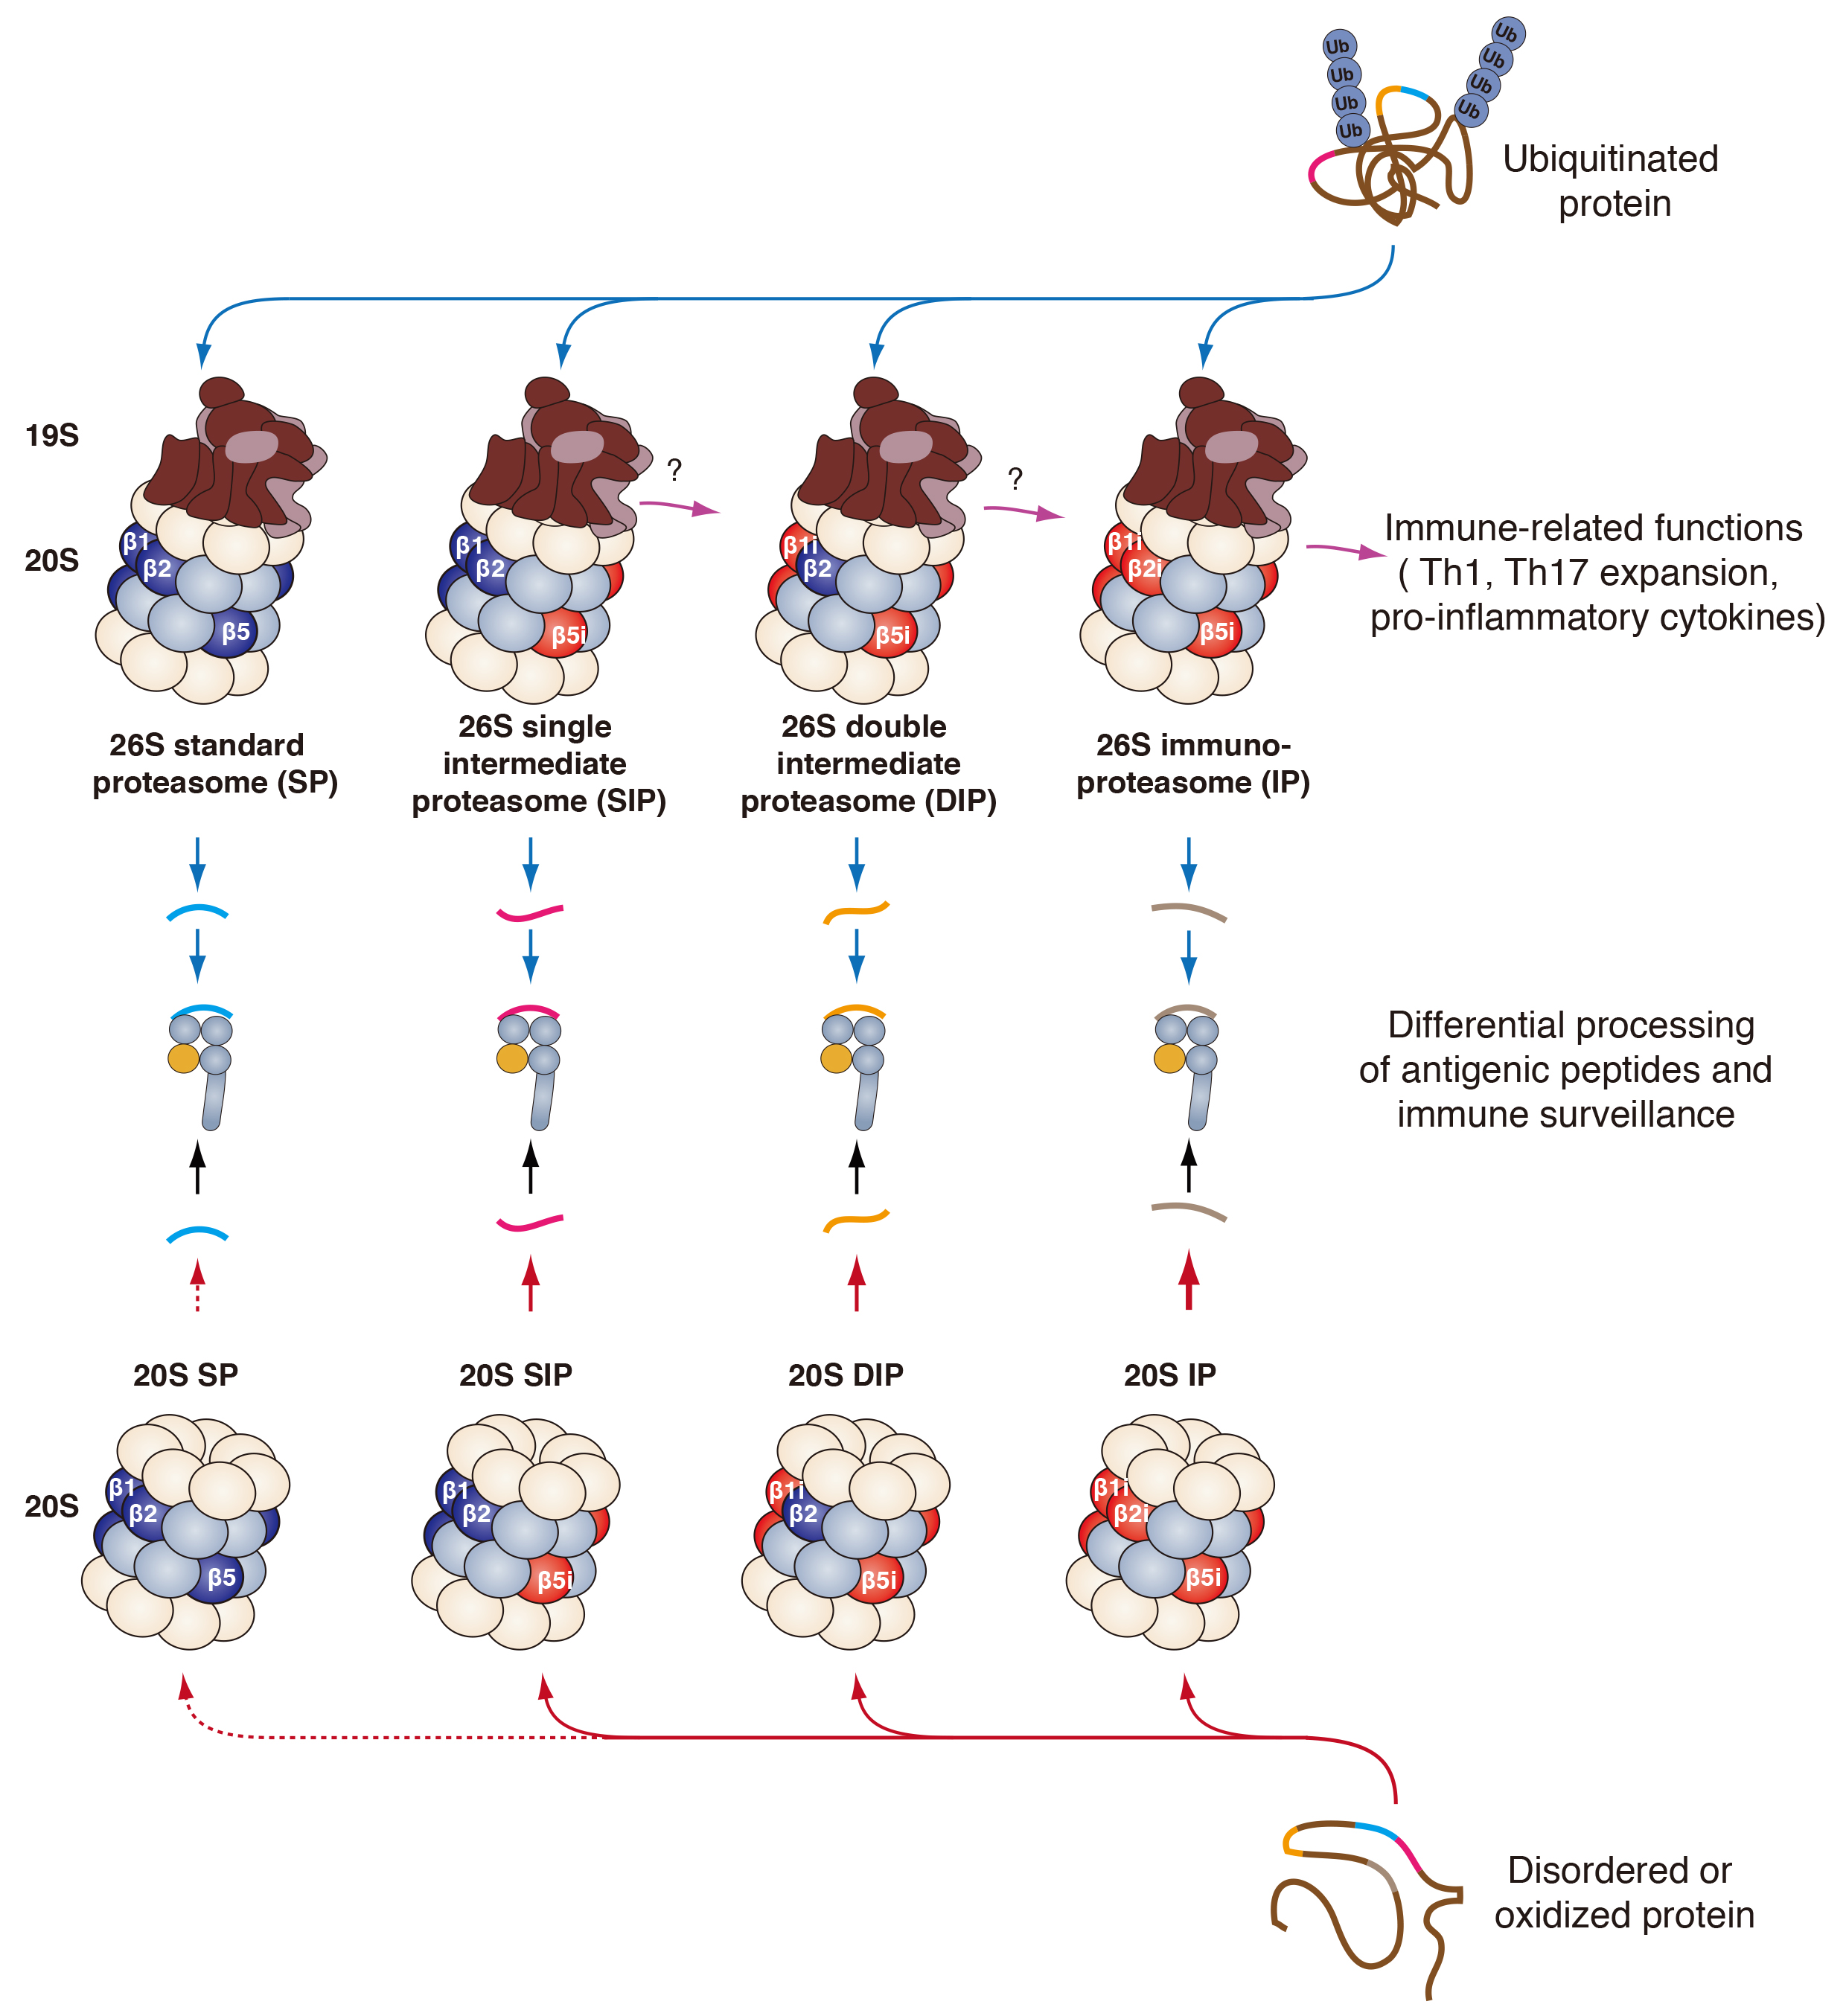 Cells Free Full-Text Functional Differences between Proteasome Subtypes picture image